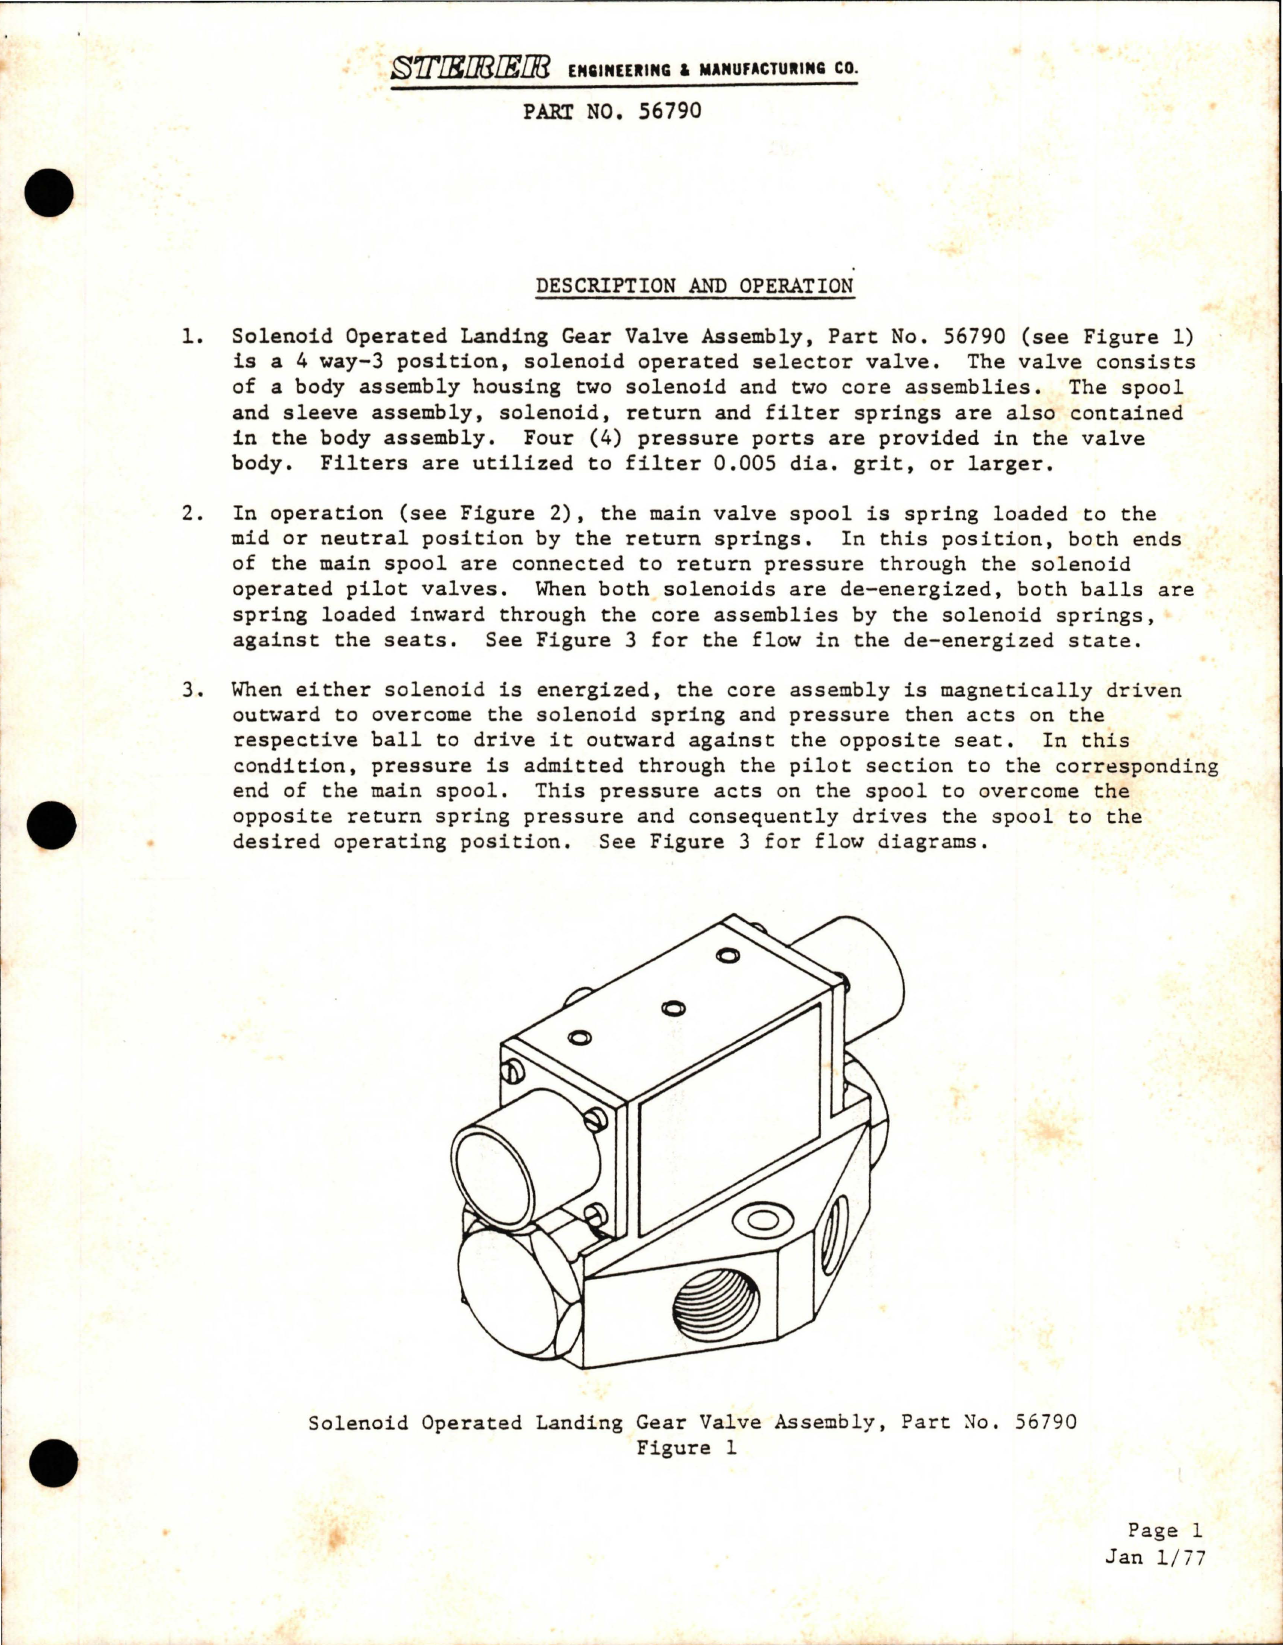 Sample page 9 from AirCorps Library document: Overhaul with Illustrated Parts List for Solenoid Operated Landing Gear Valve Assembly - Part 56790